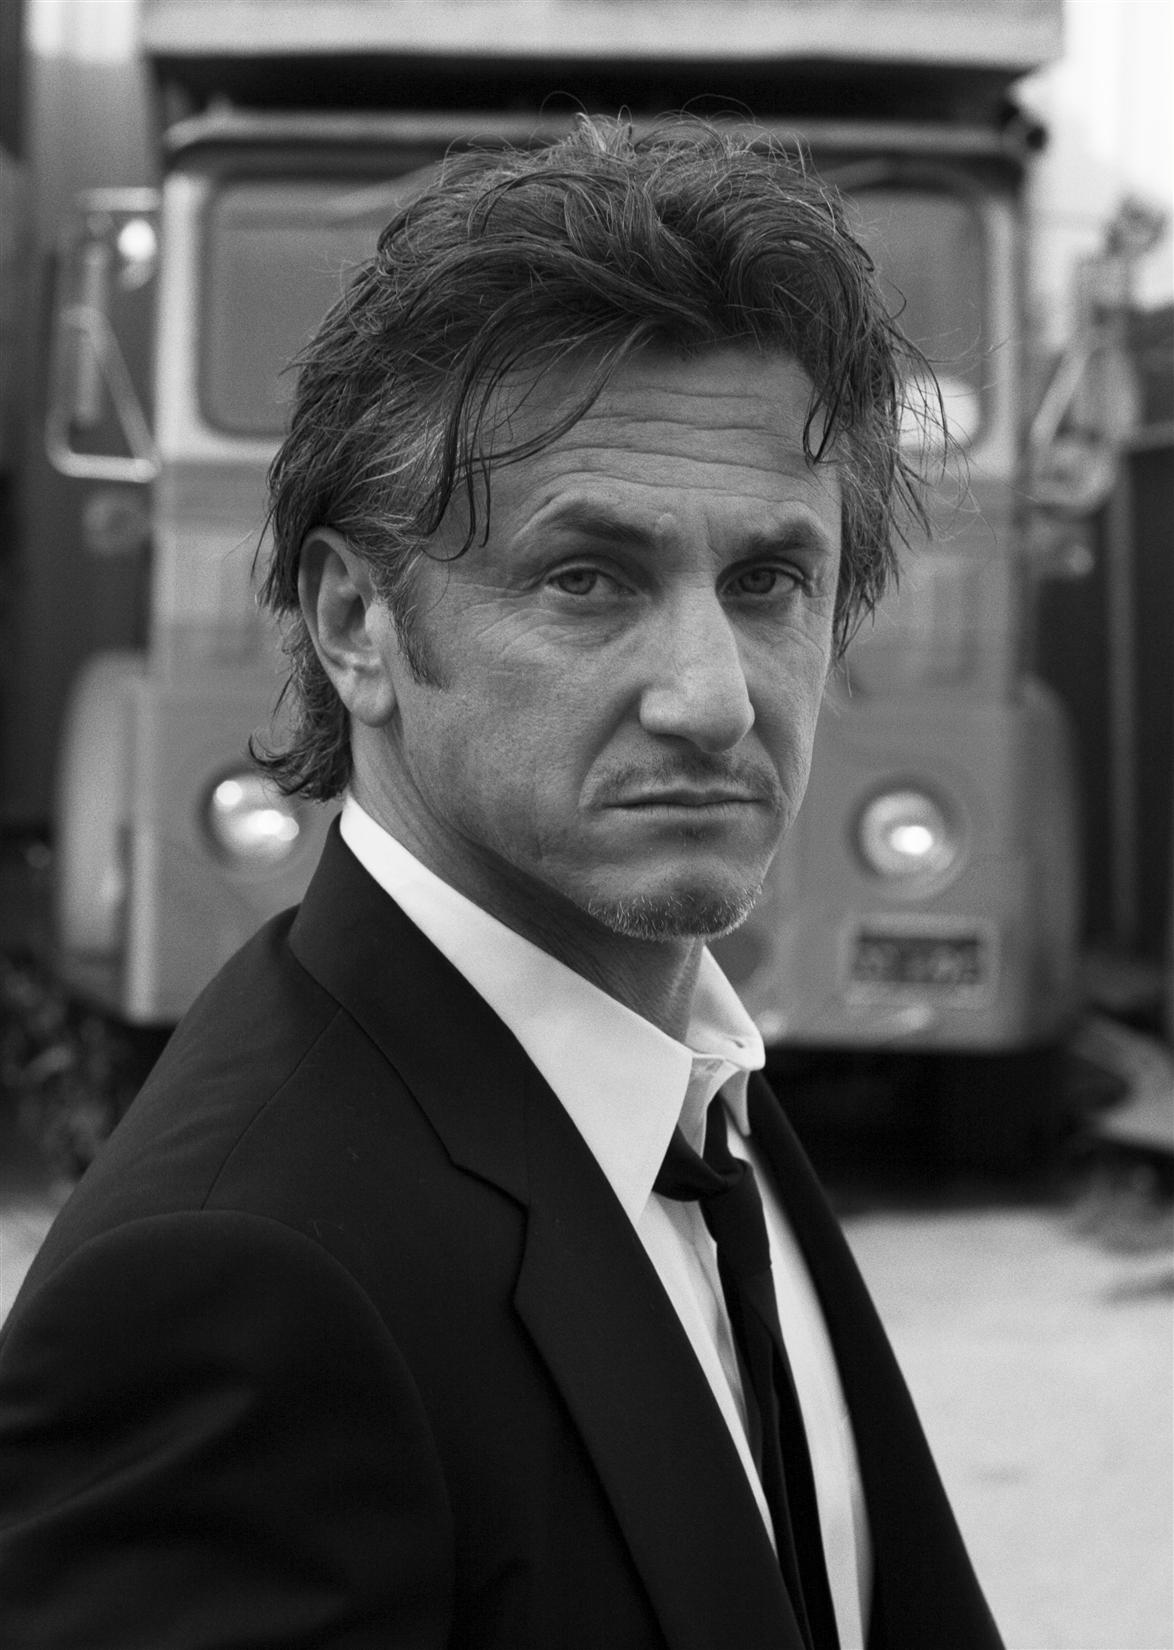 Sean Penn Wallpaper Gallery Pictures Xtreme Beauty